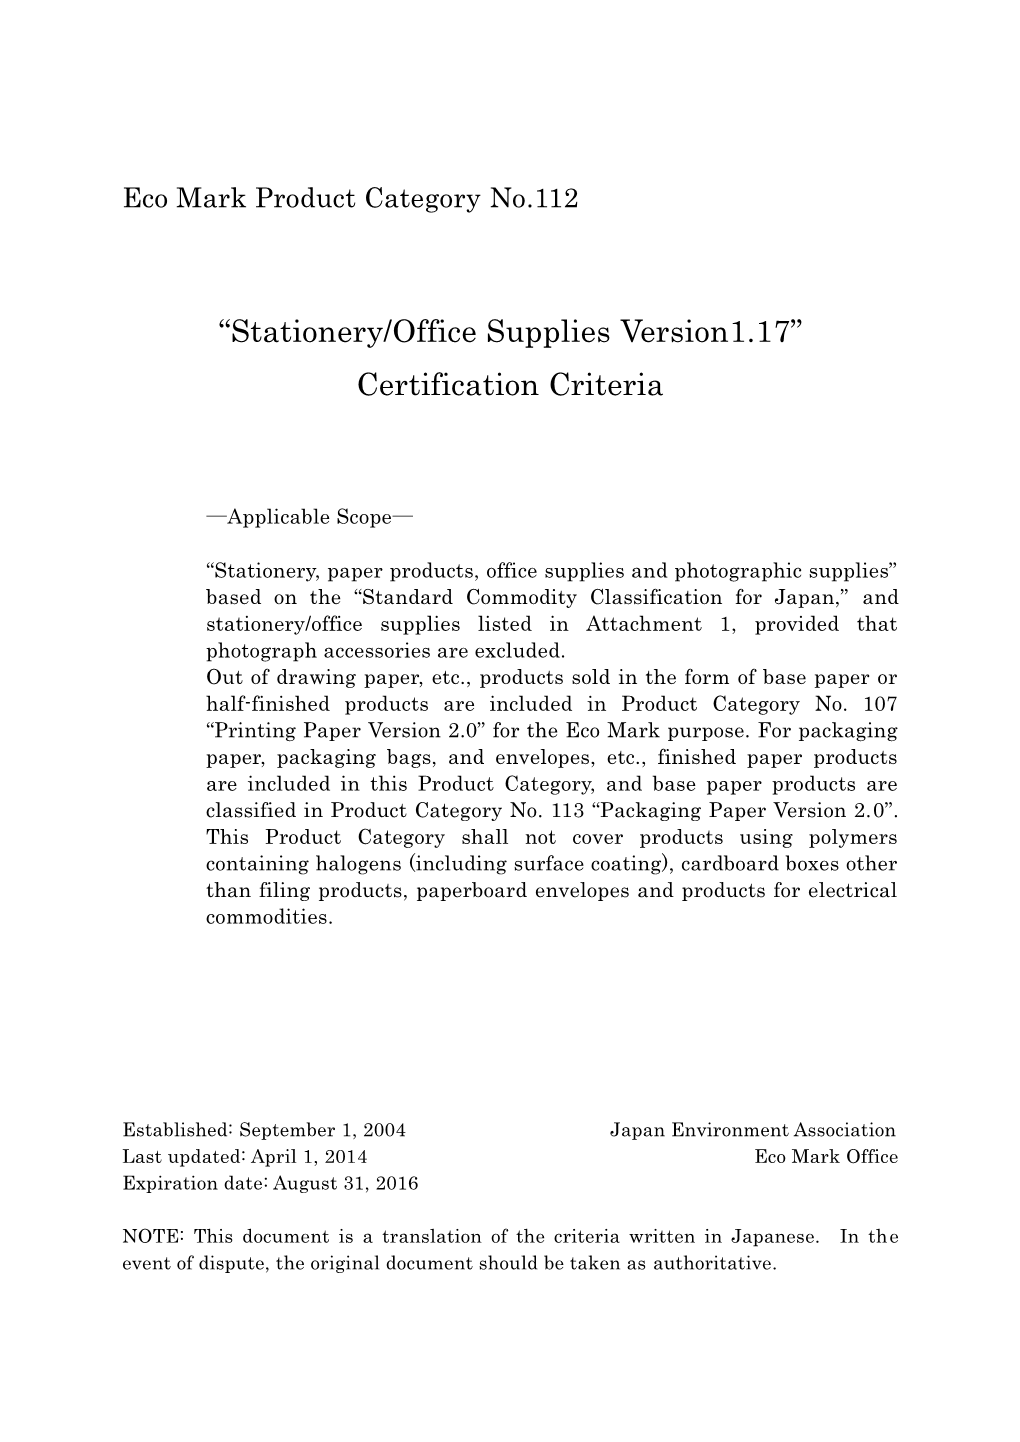 “Stationery/Office Supplies Version1.17” Certification Criteria